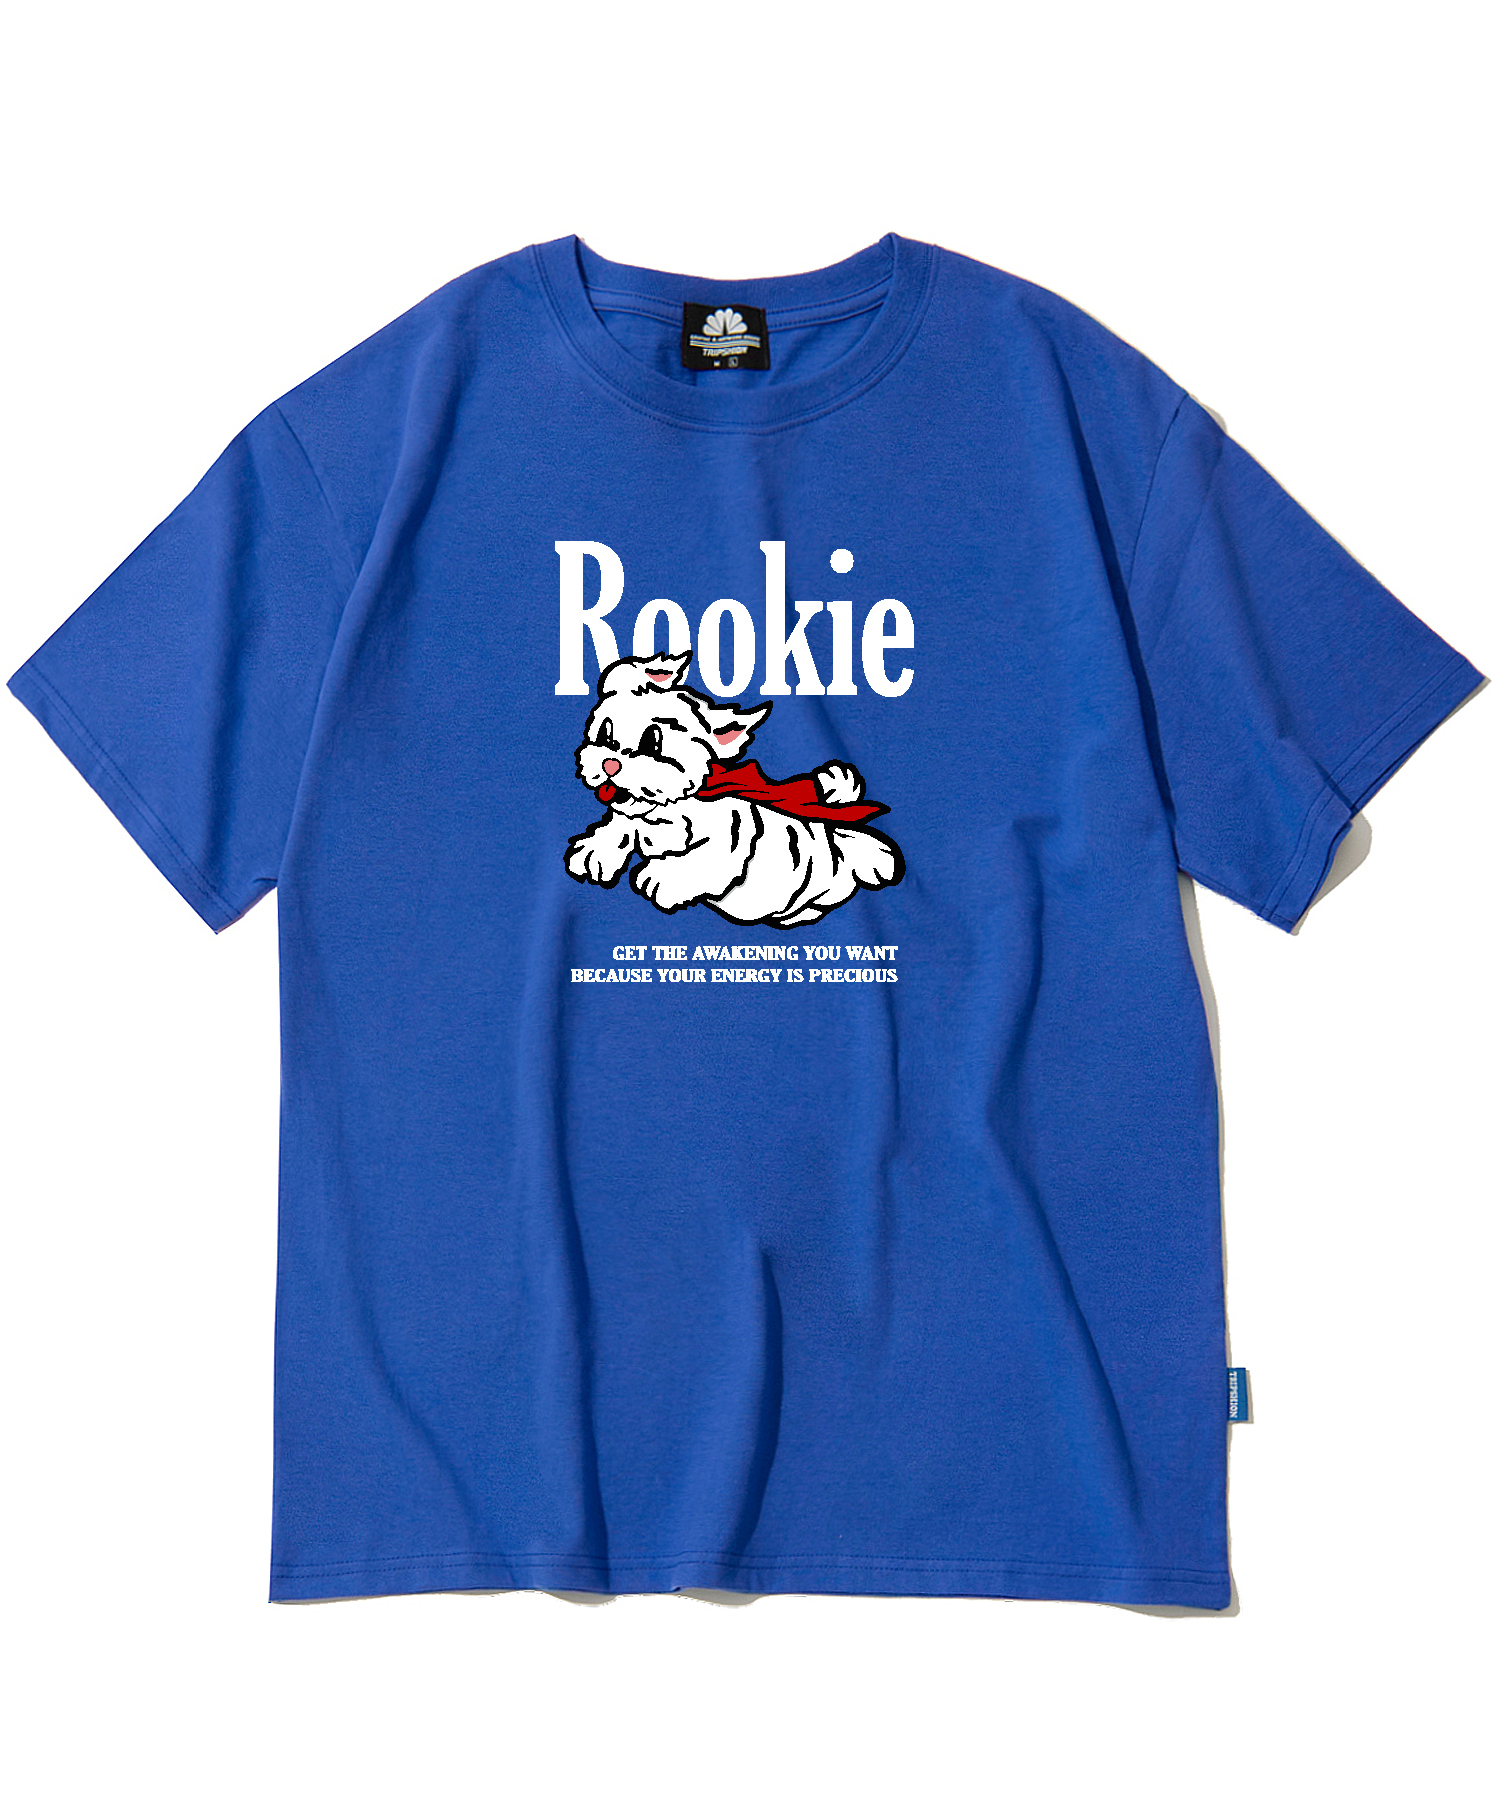 ROOKIE MALTESE GRAPHIC T-SHIRTS - BLUE